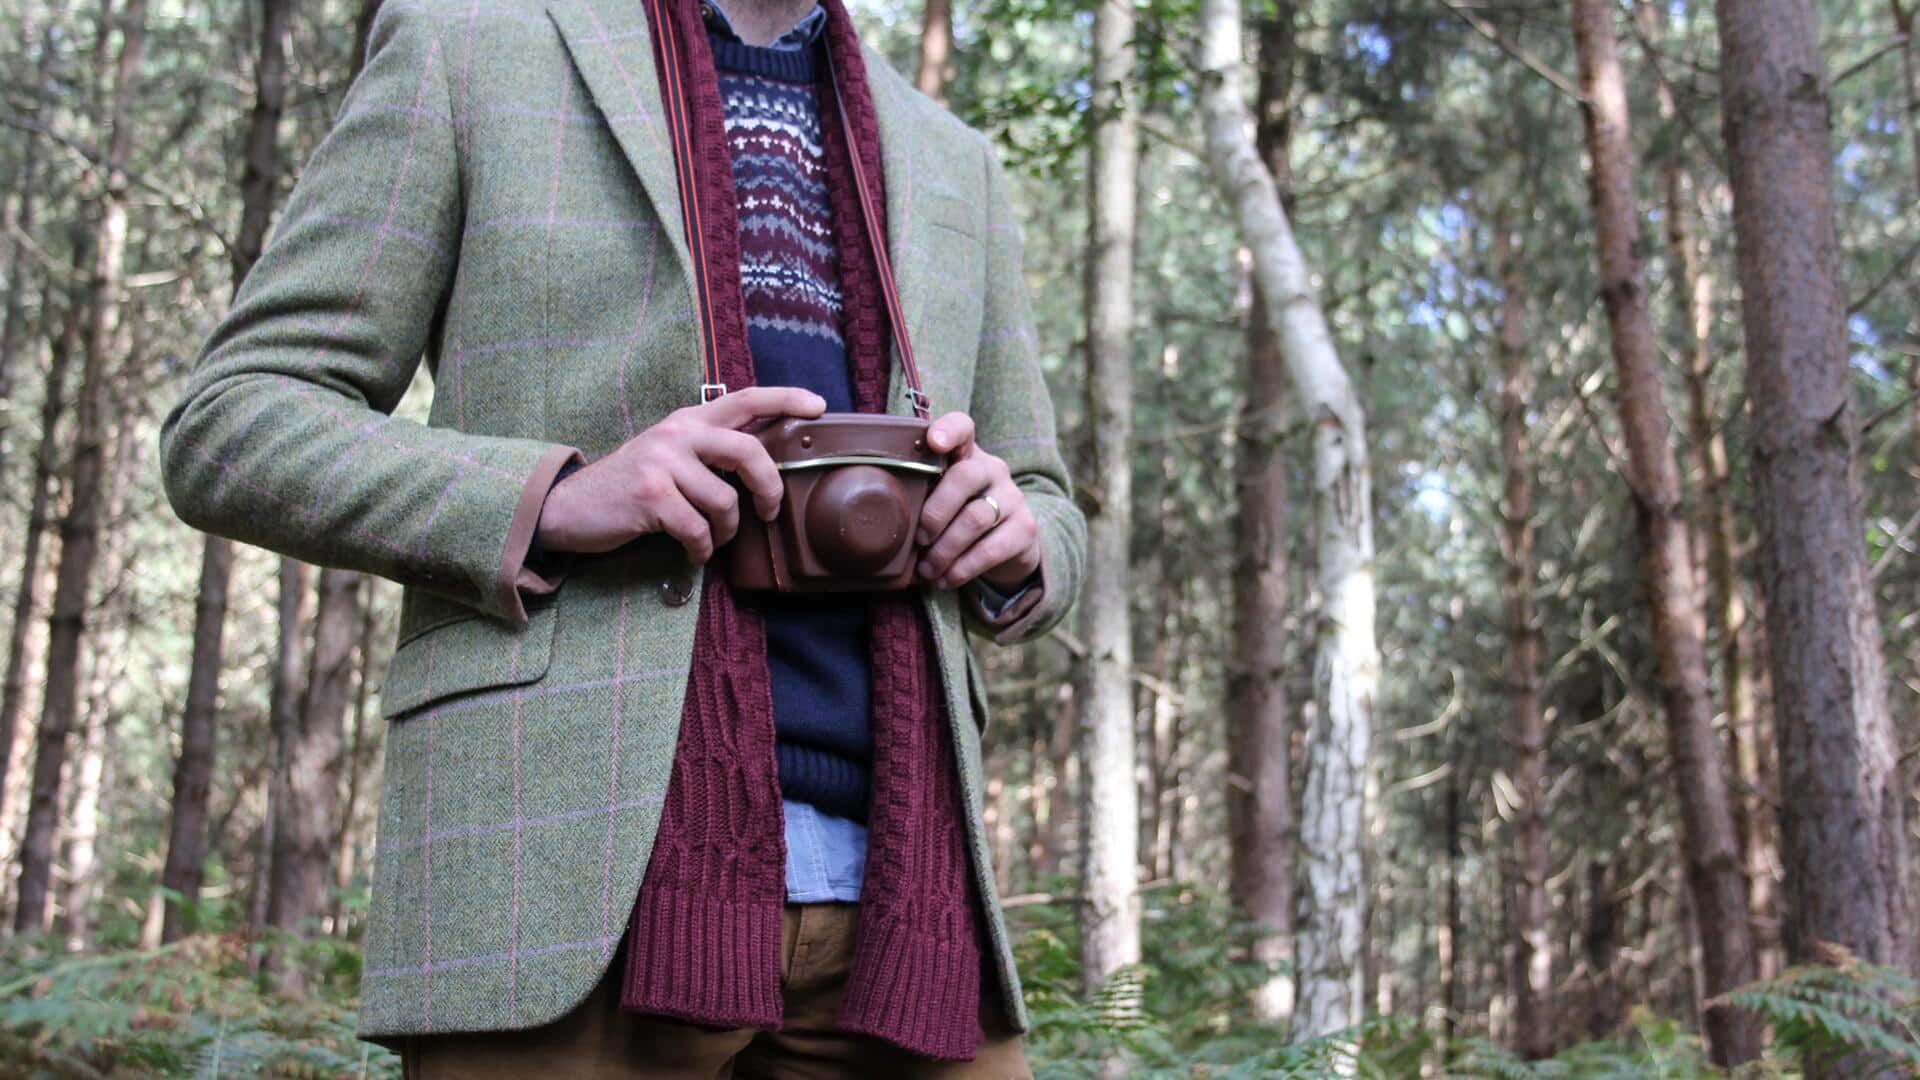 Tweed blazer pairing techniques for spending autumn in style